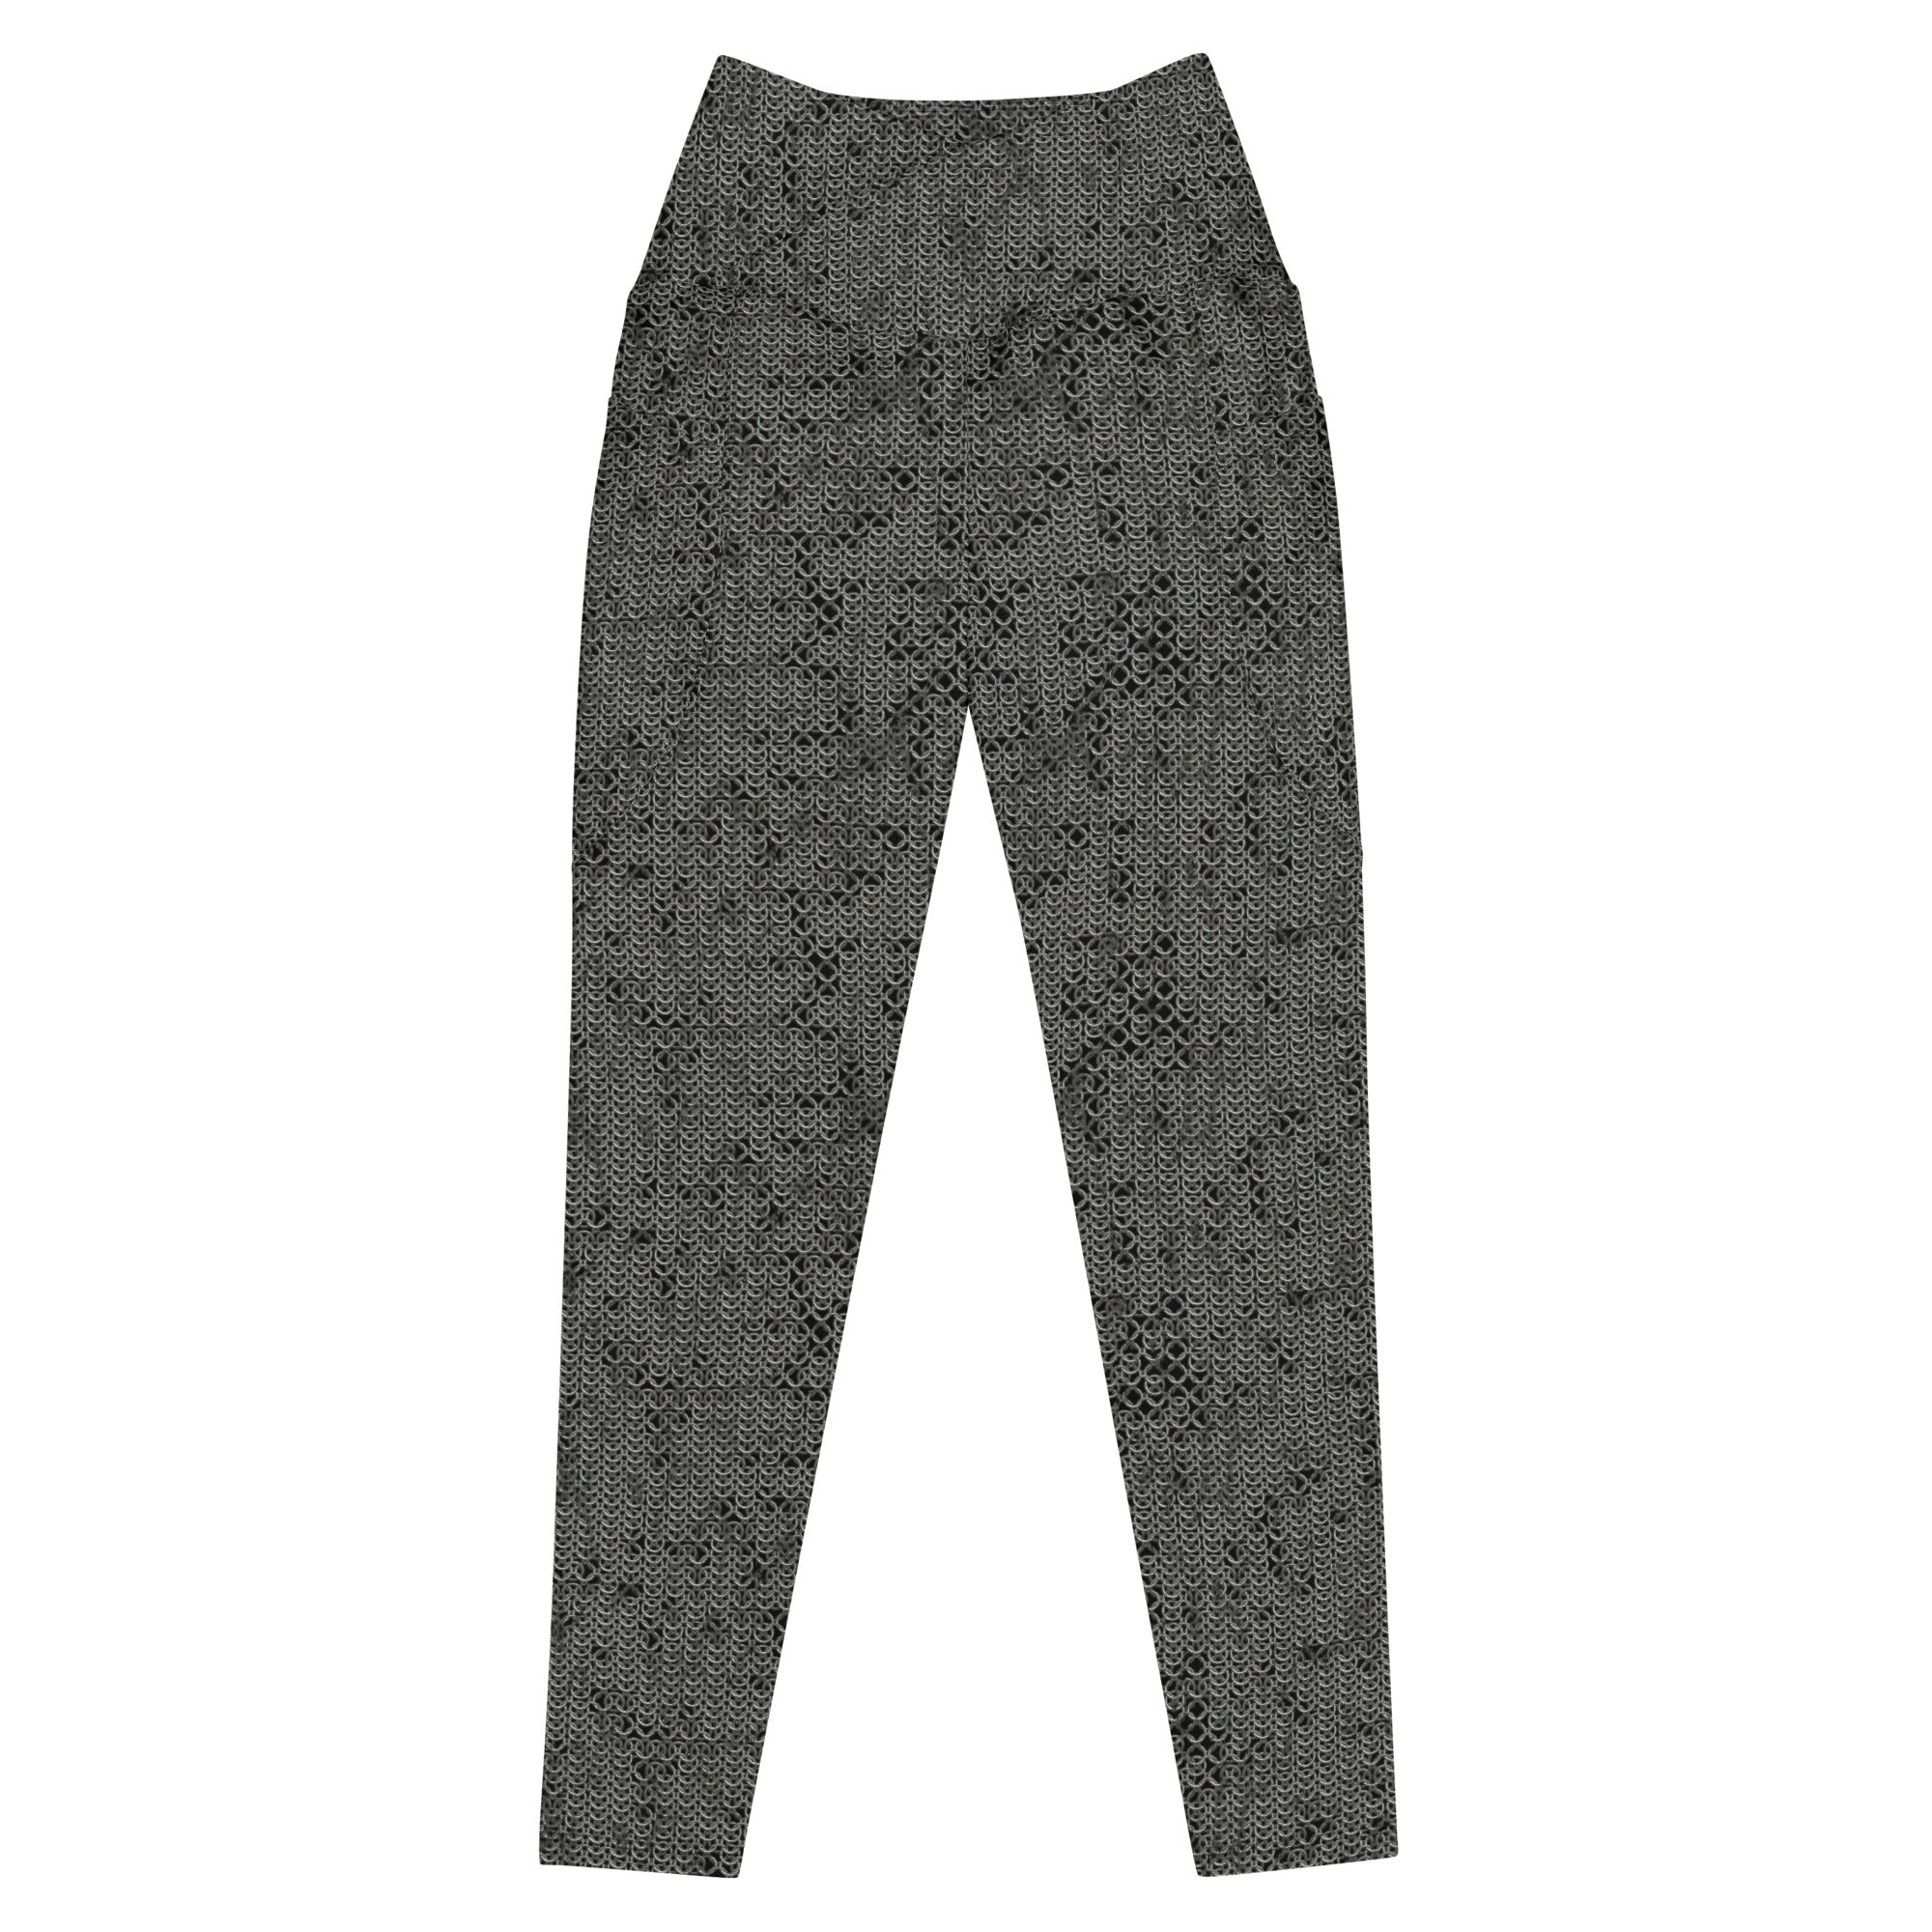 Lupine Leggings Bundle! Save BIG when you buy the Women's and Kid's pa